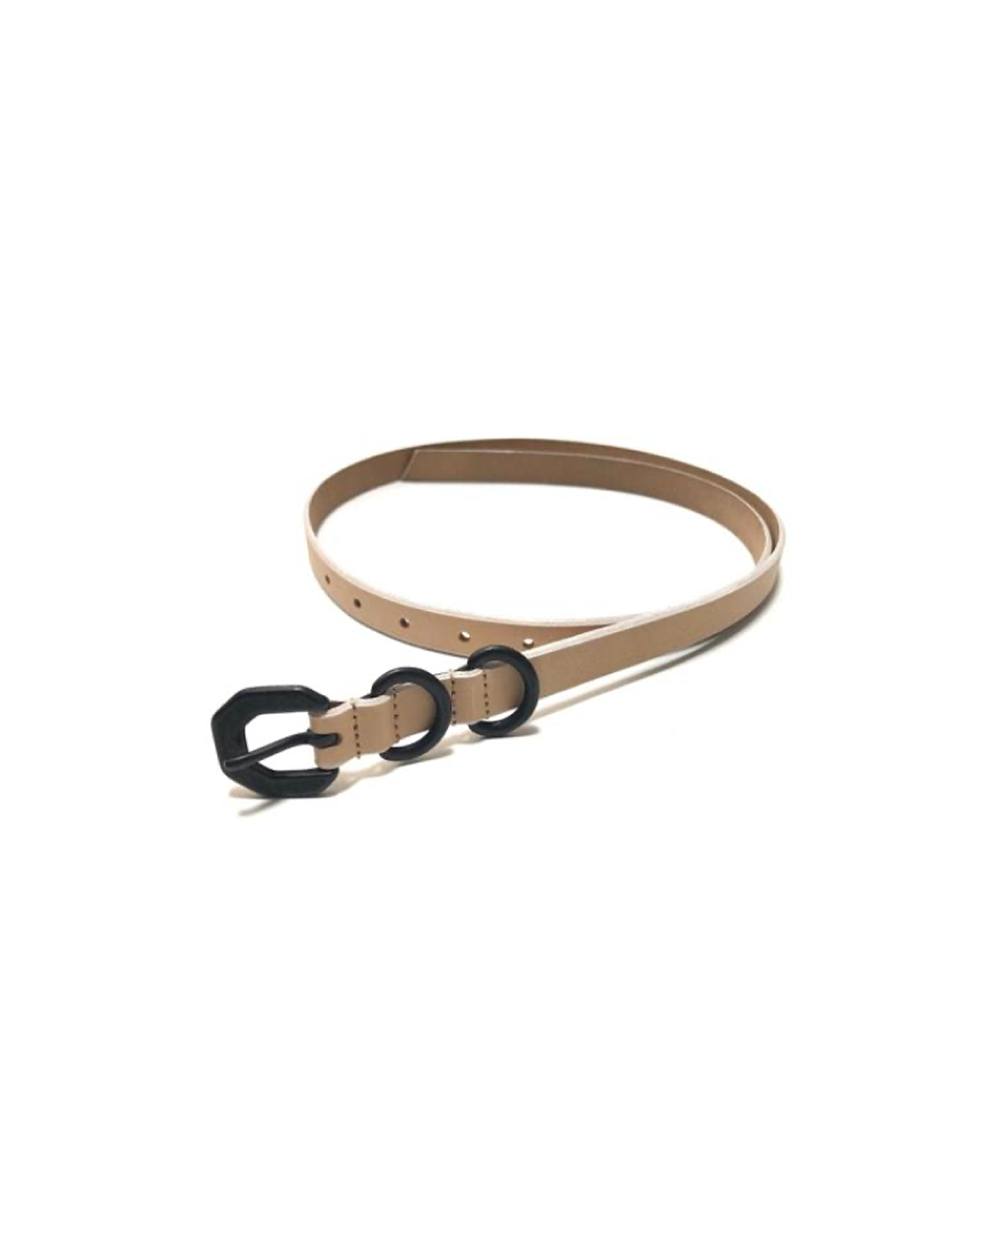 【ANCELLM】 NARROW LEATHER BELT - NATURAL